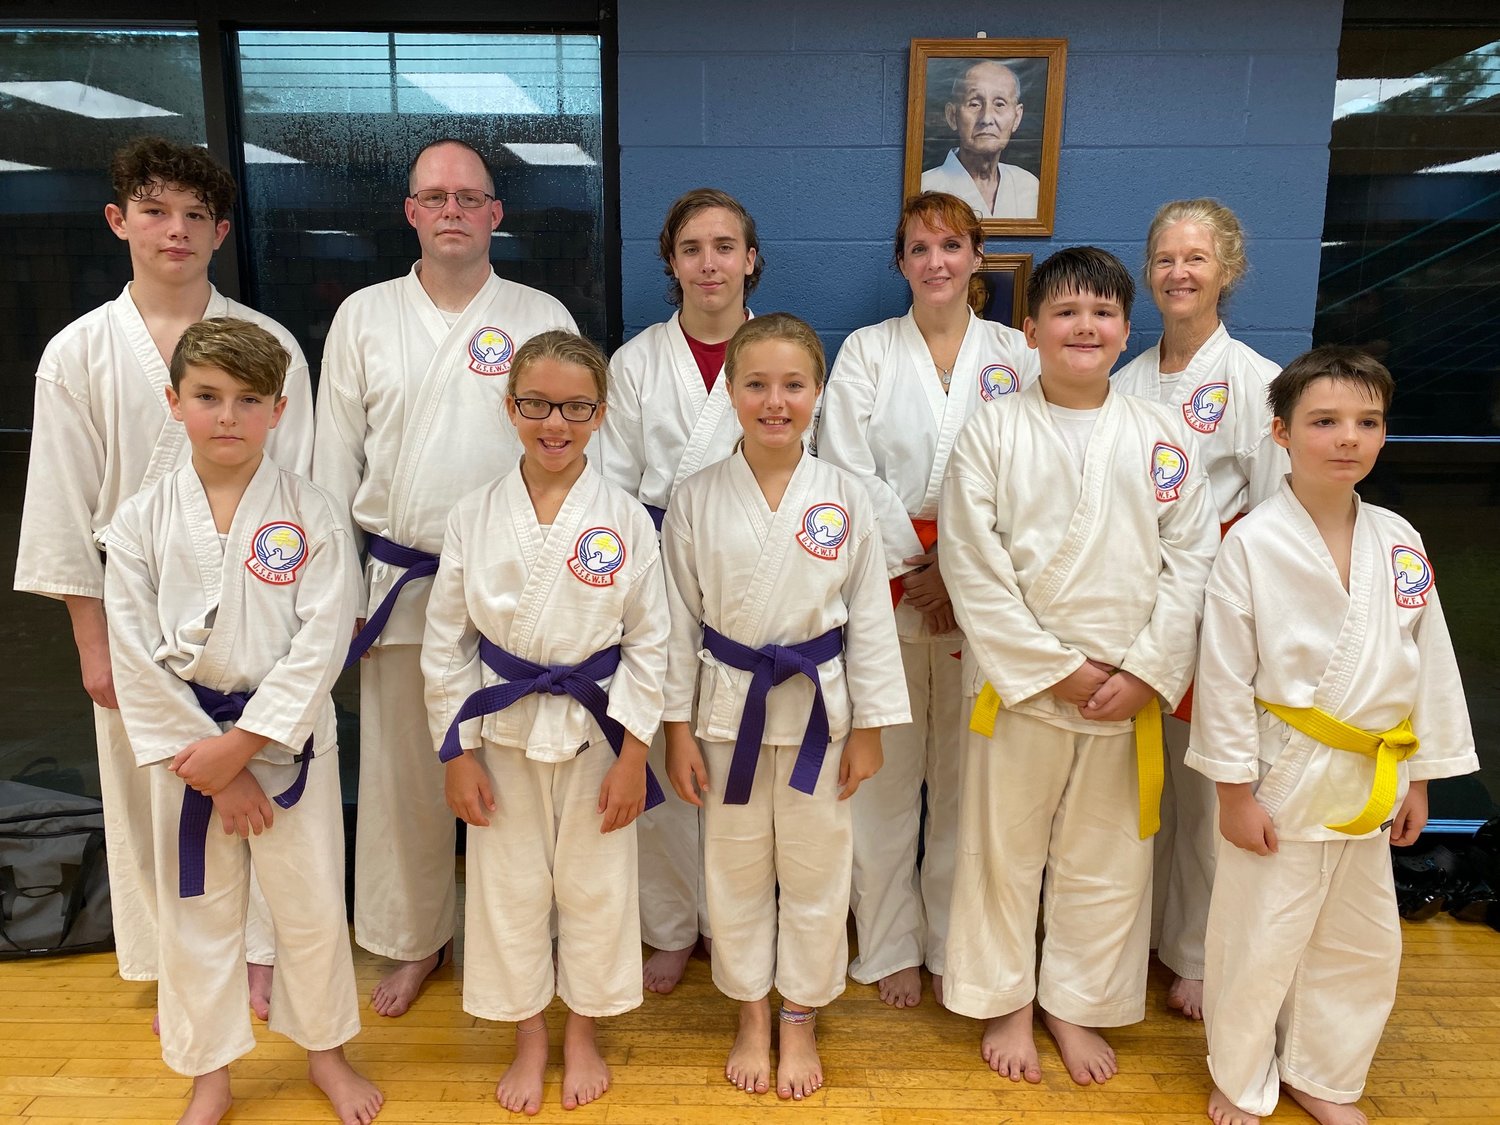 Students who recently earned new belts are (first row) Grayson Tidwell, Landry Smith, Ava Tidwell, Brennon Bagsby, and Asher Nichols; (second row) Jacob Rigsby, Wayne Parker, Sam Latham, Nicole Latham, and Theresa Brown.